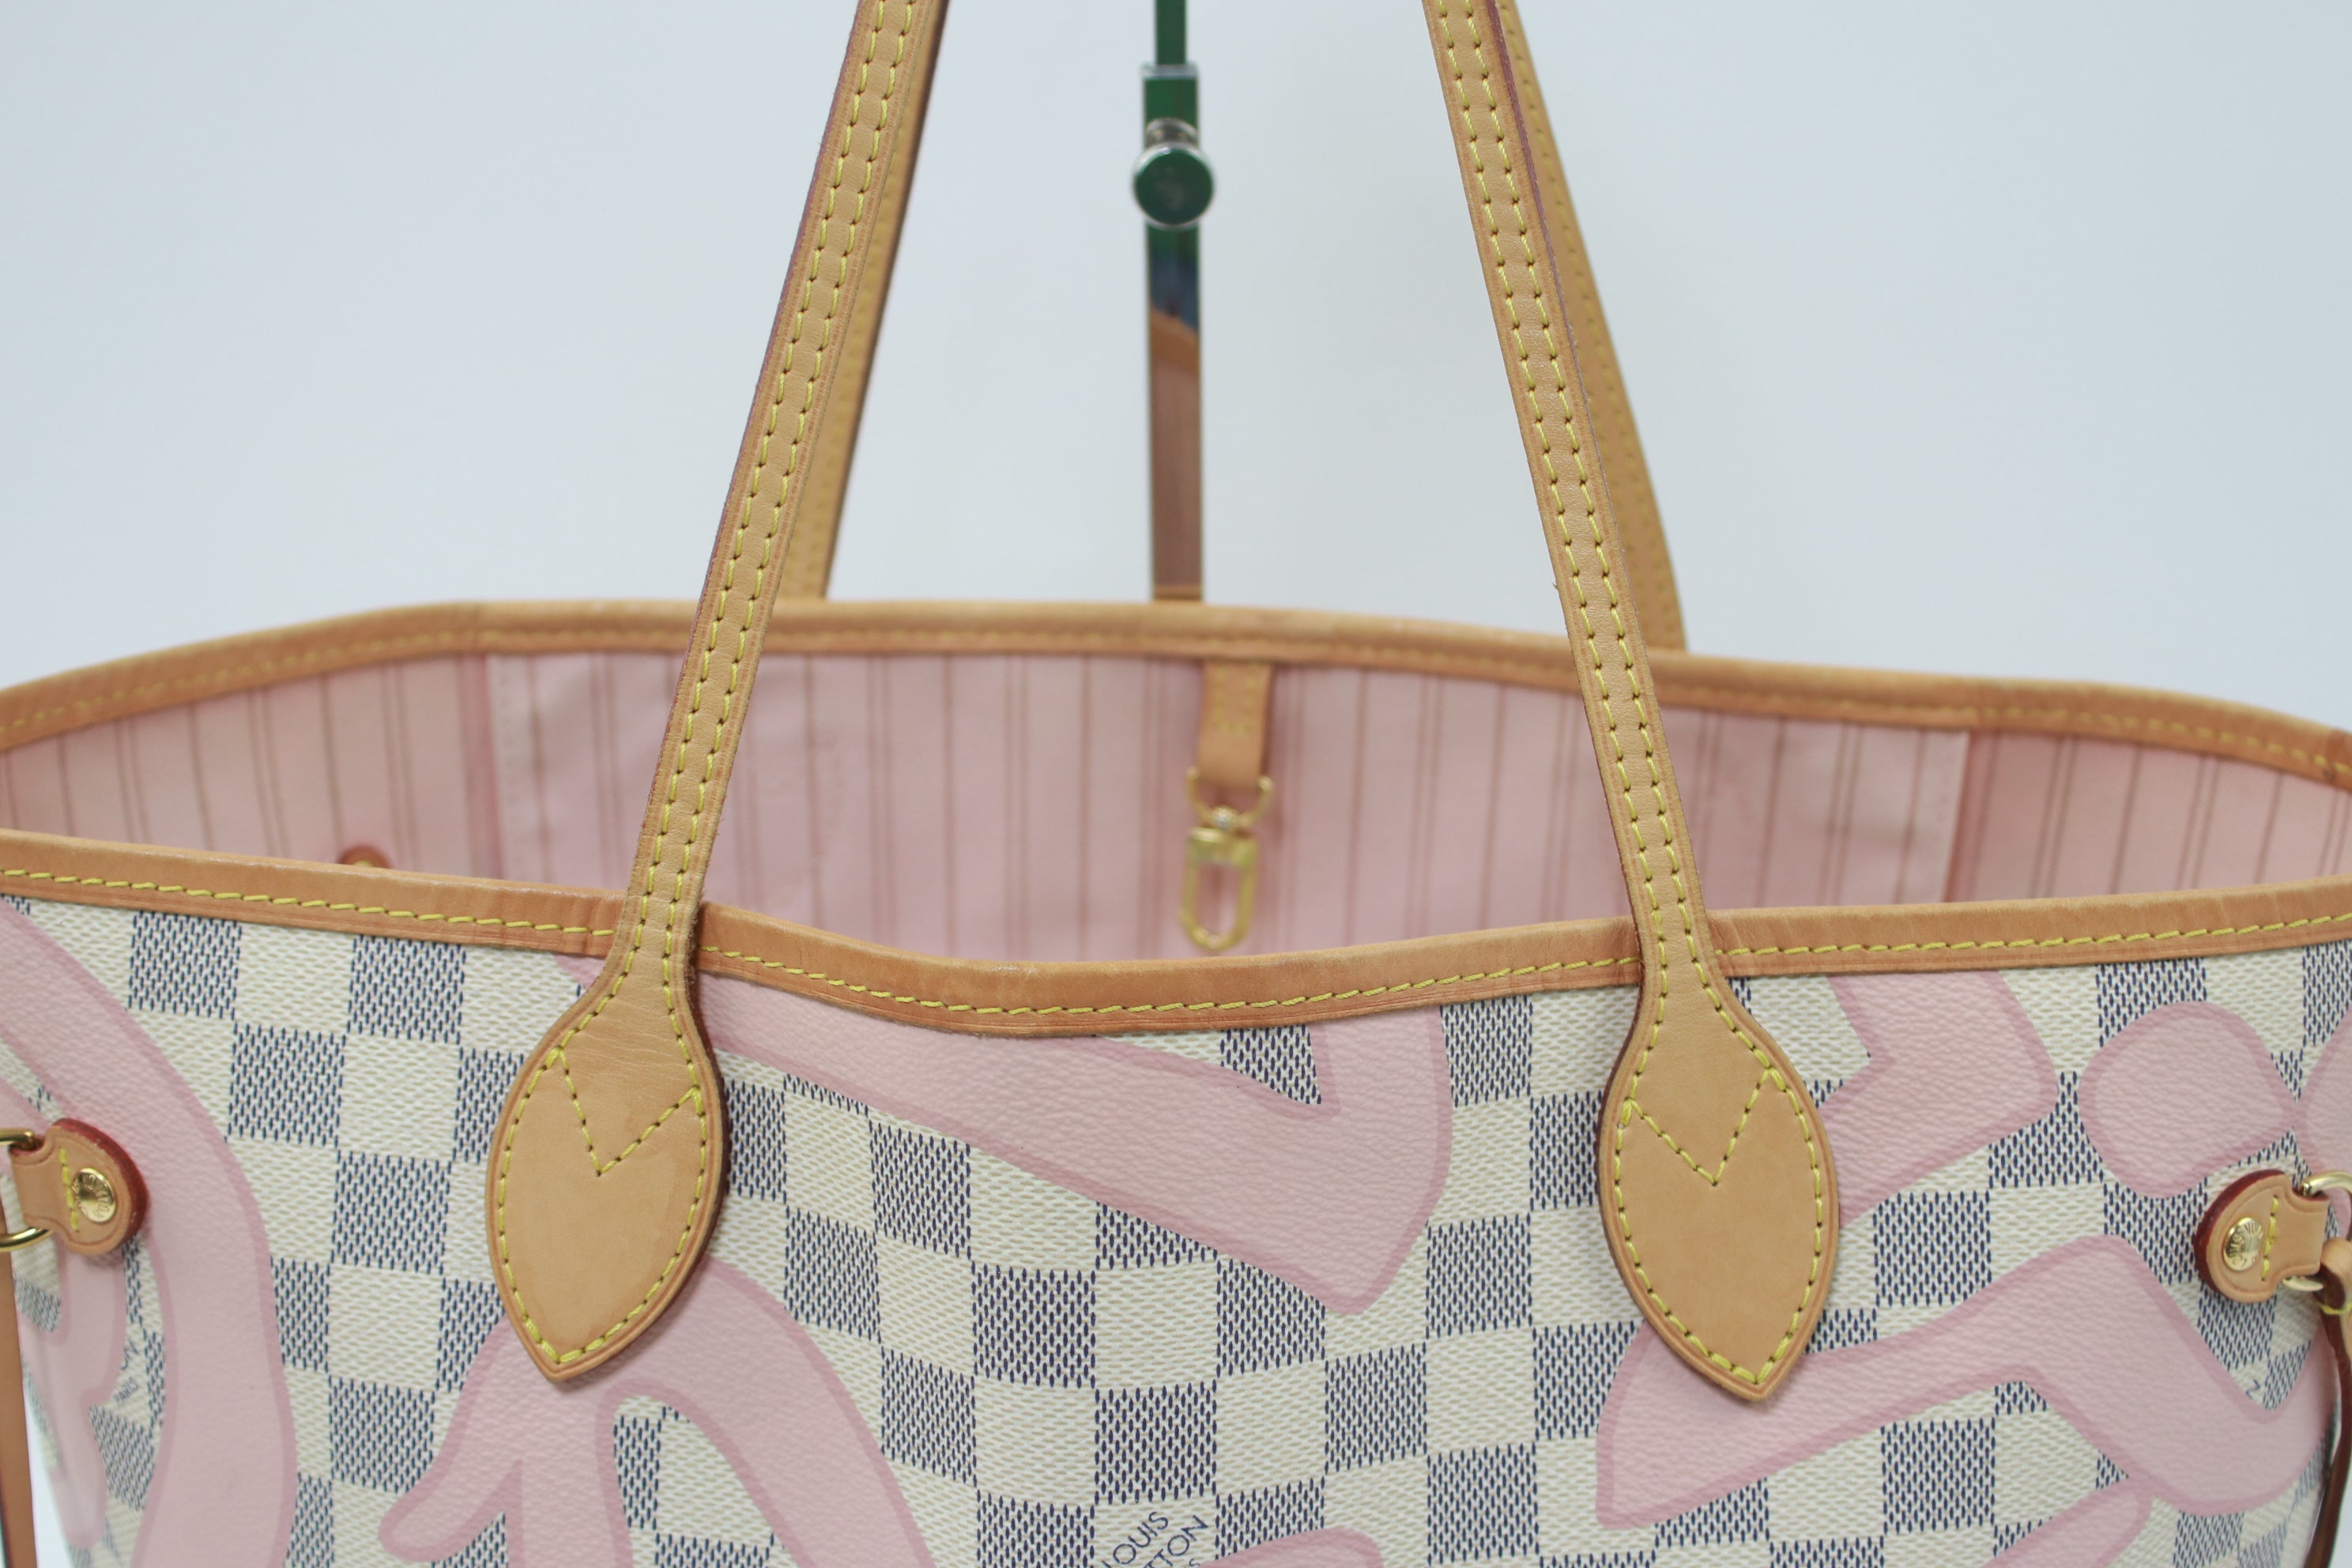 PRELOVED Louis Vuitton Damier Azur Neverfull MM Tote (Pink